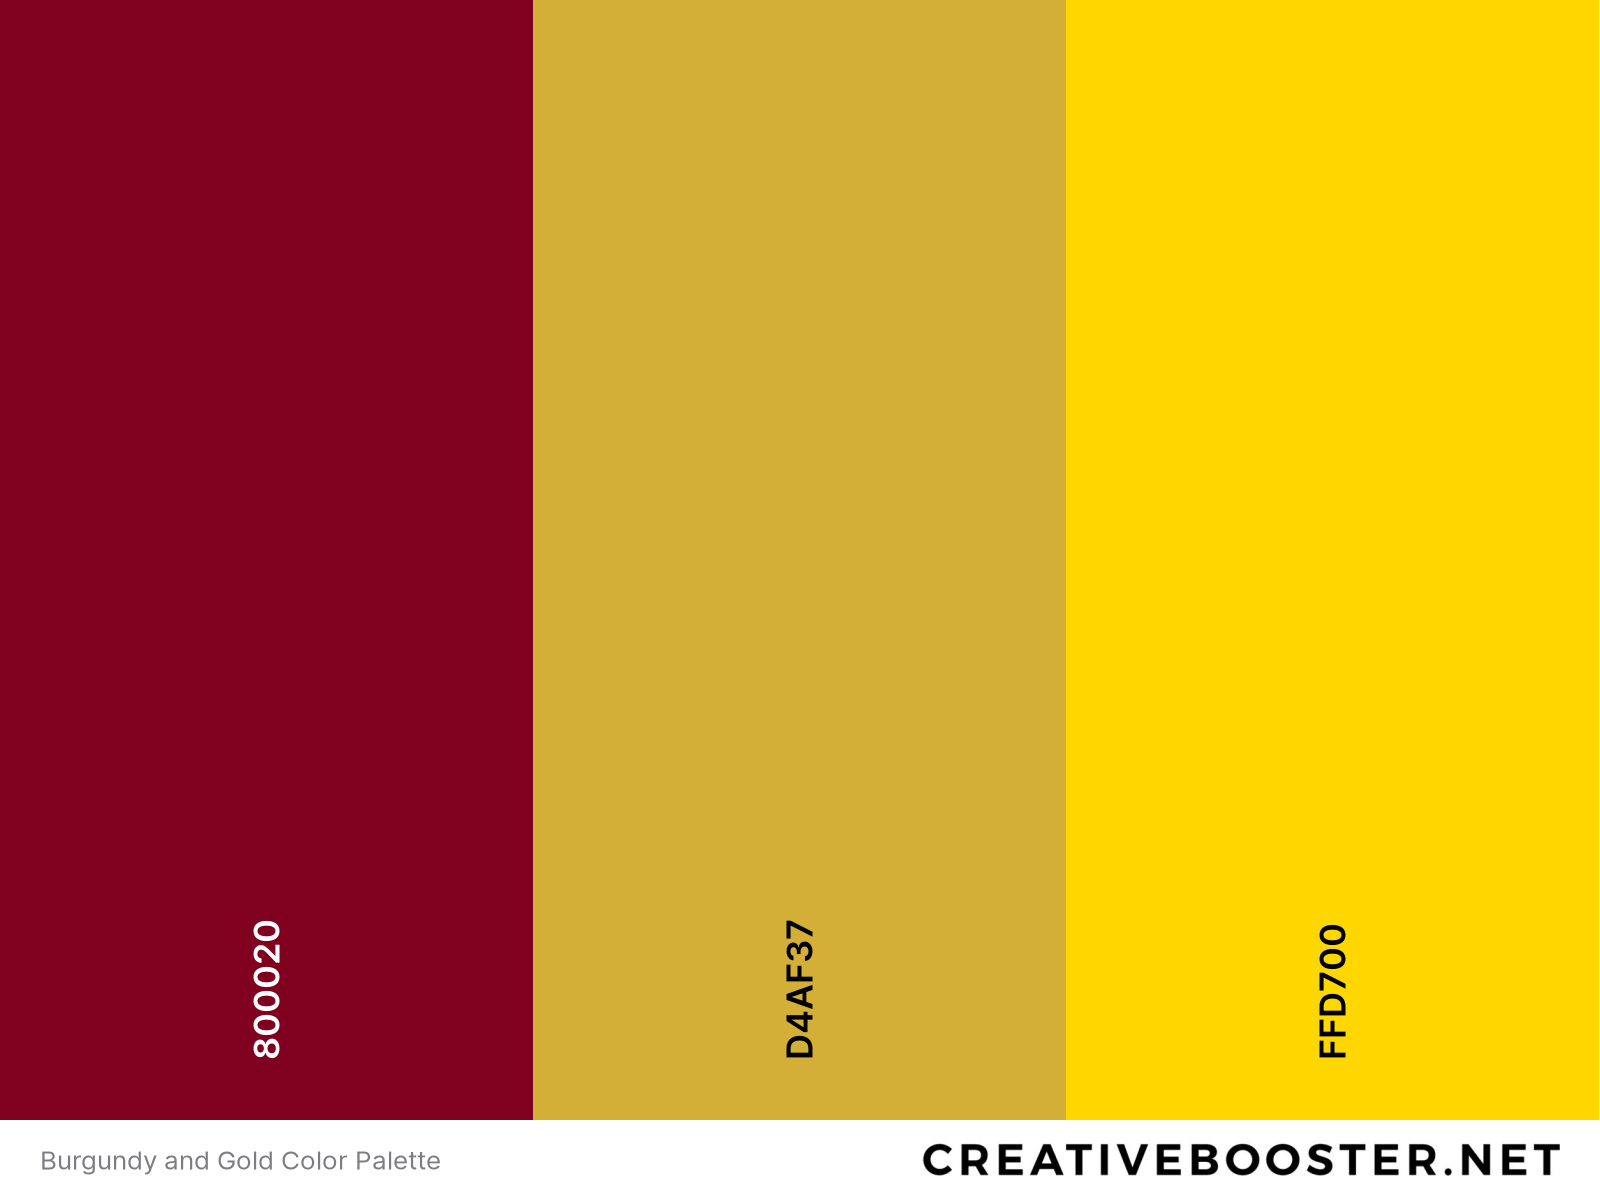 Burgundy and Gold Color Palette